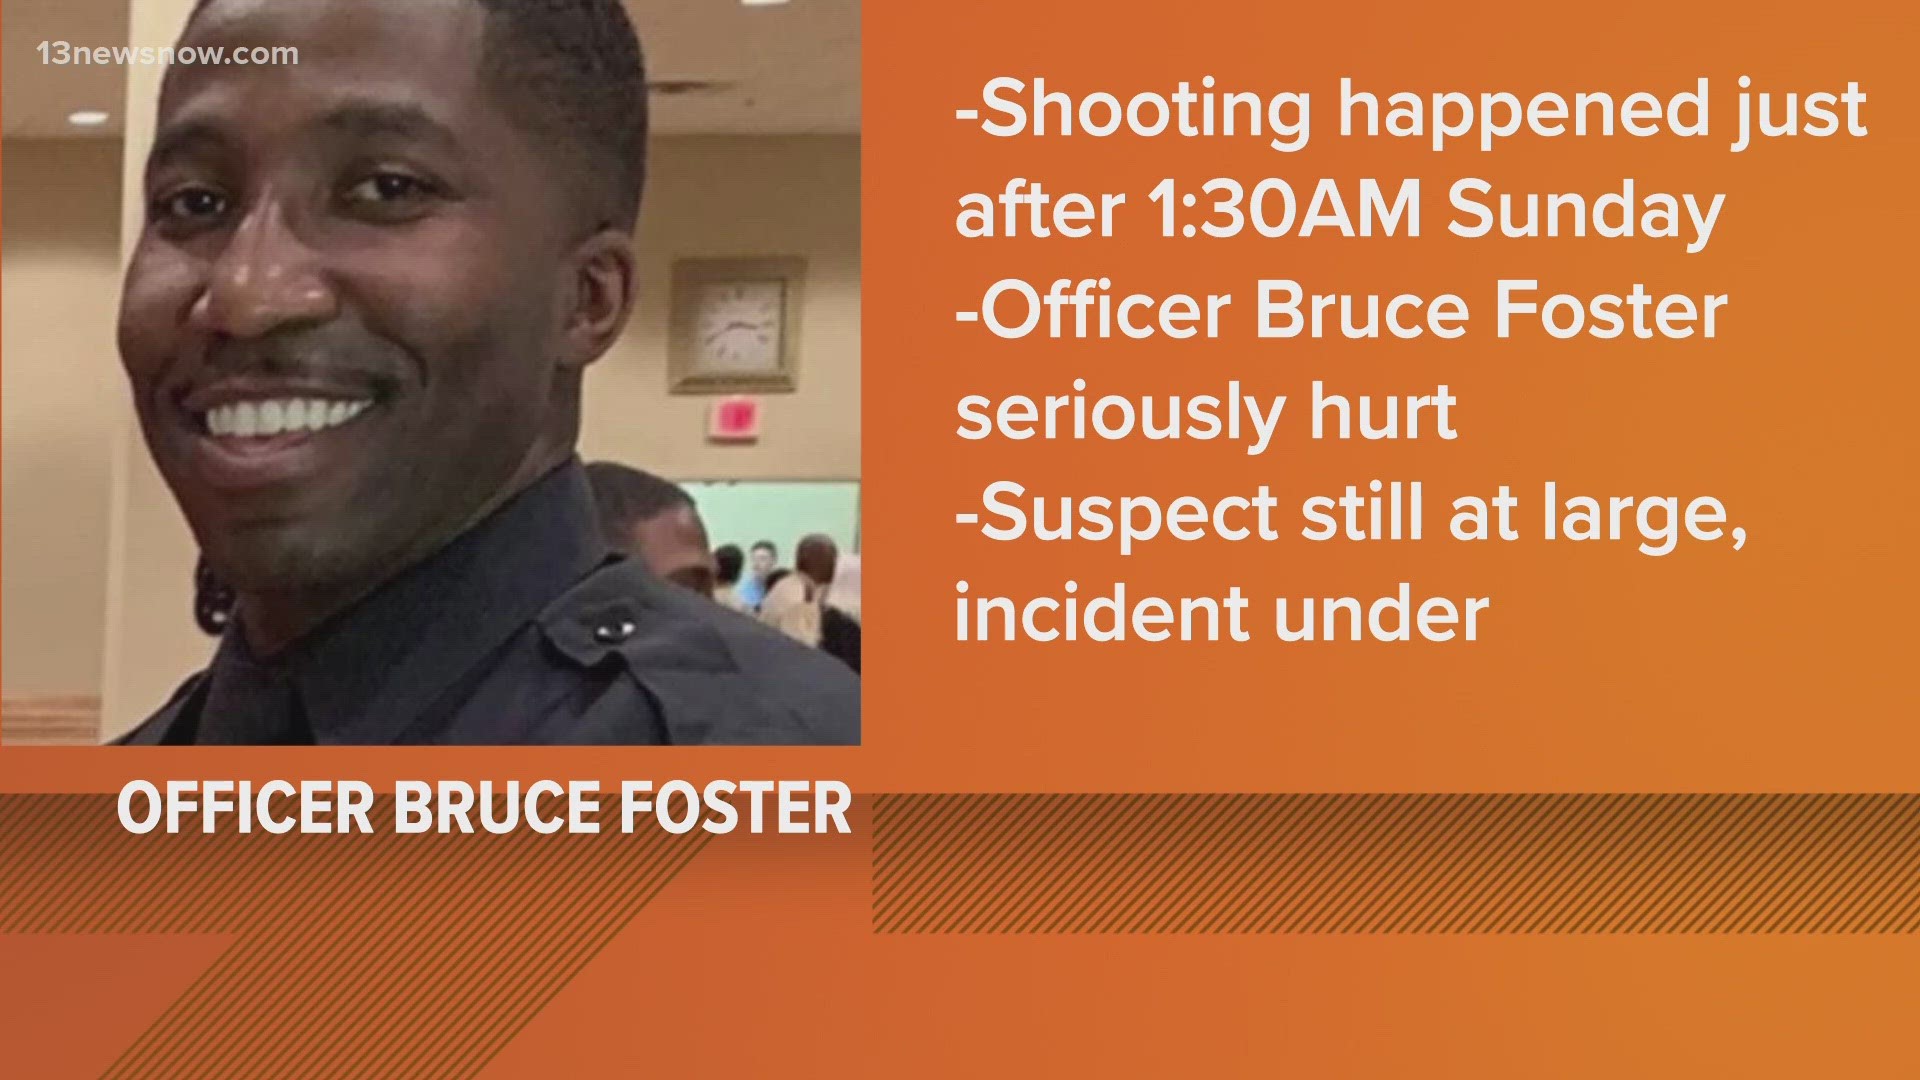 Police say the shooting happened just after 1:30 a.m. Sunday when Officer Bruce Foster was in the process of investigating a campus disturbance.